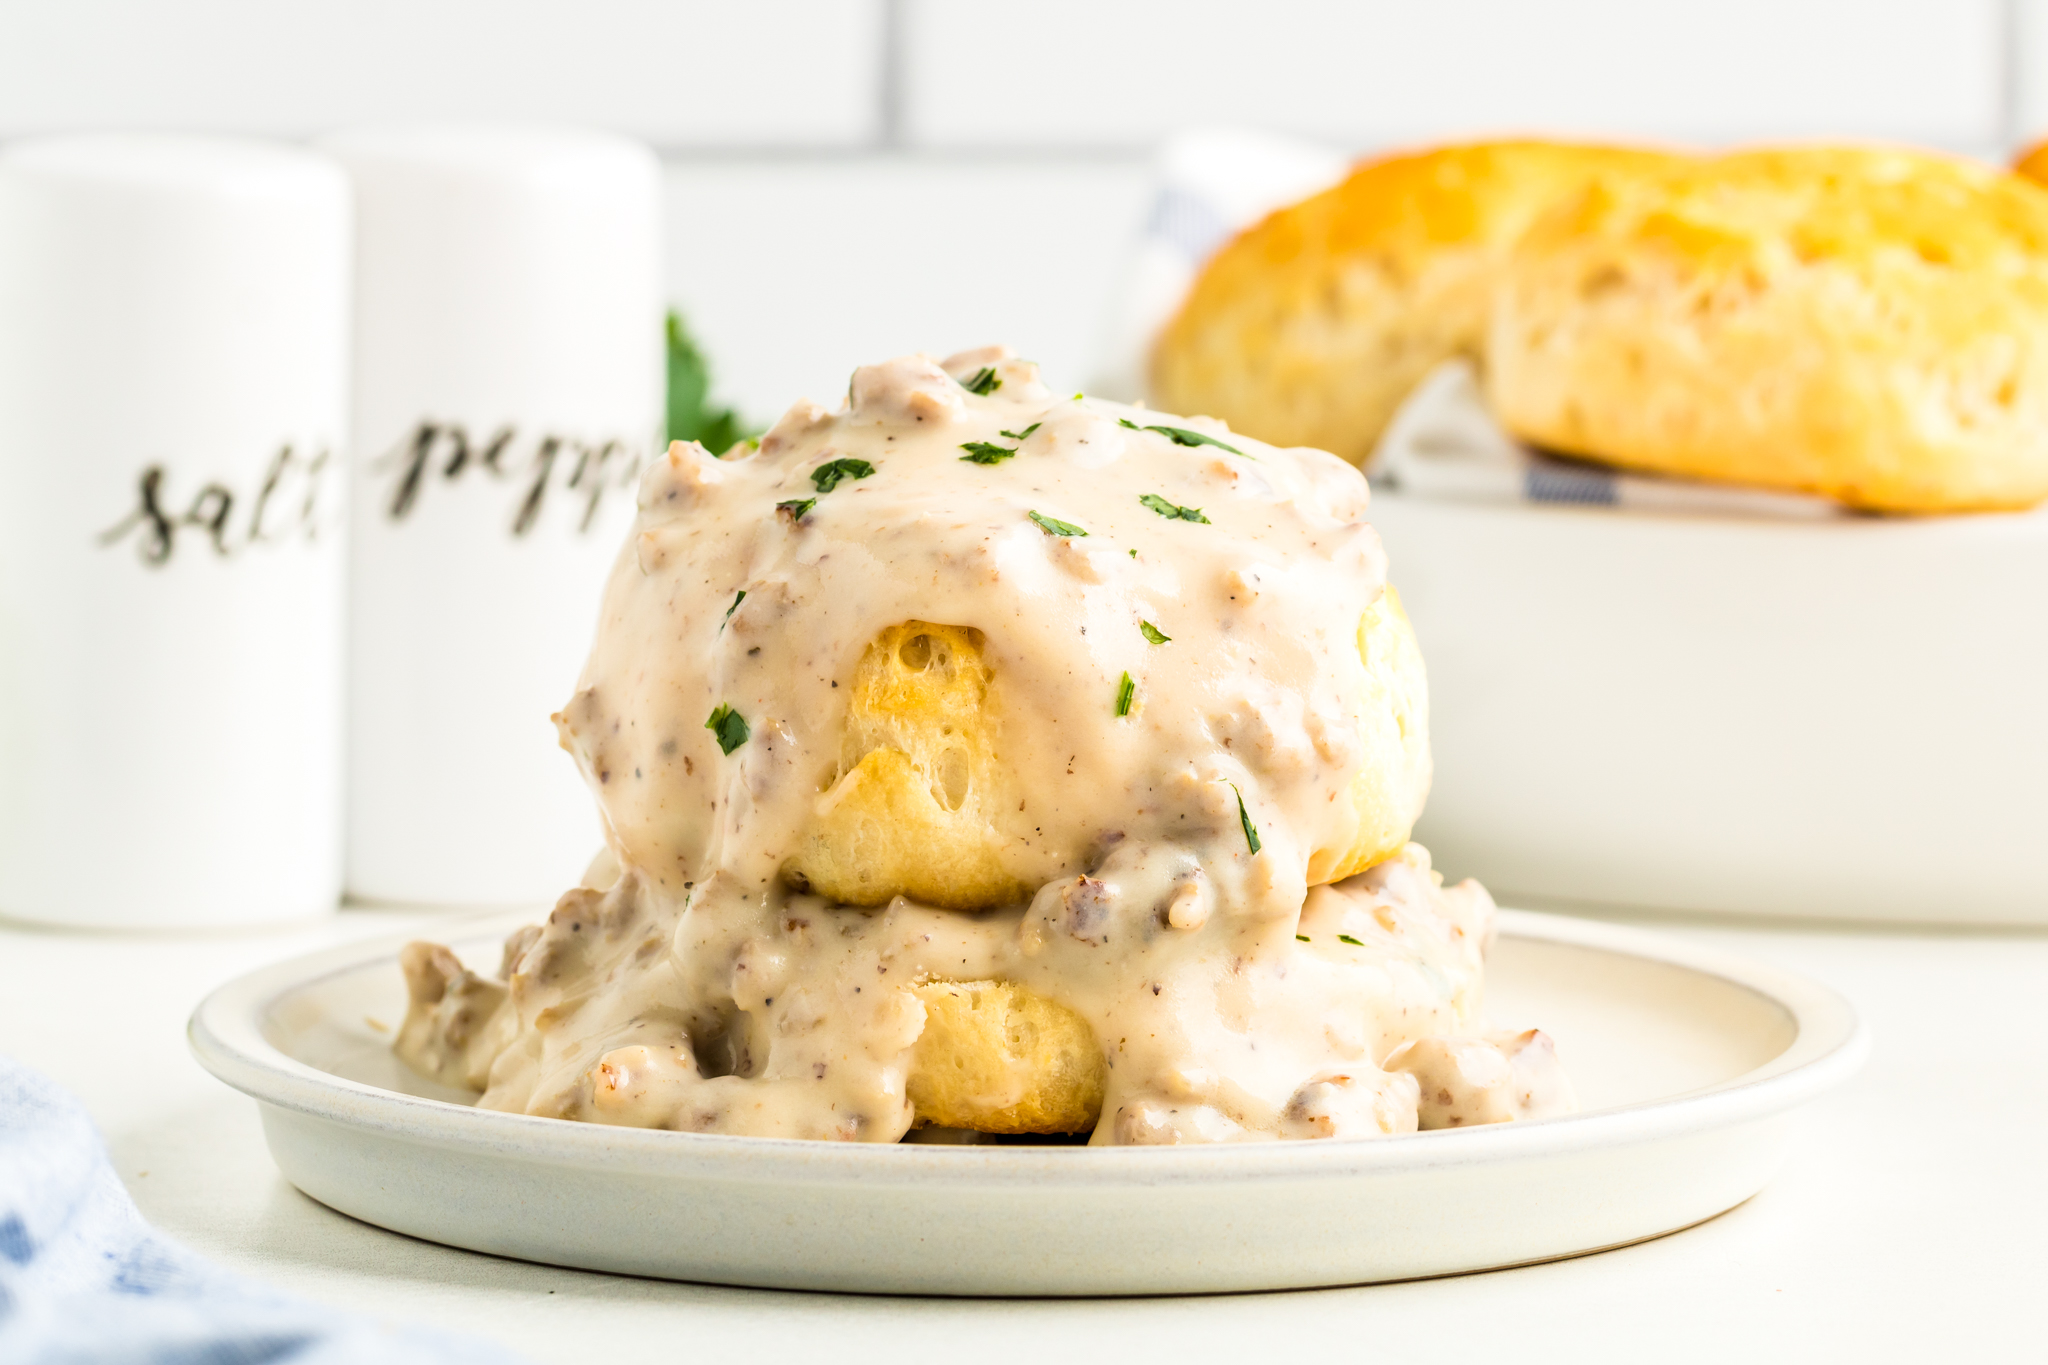 A photo of biscuits and gravy on a plate